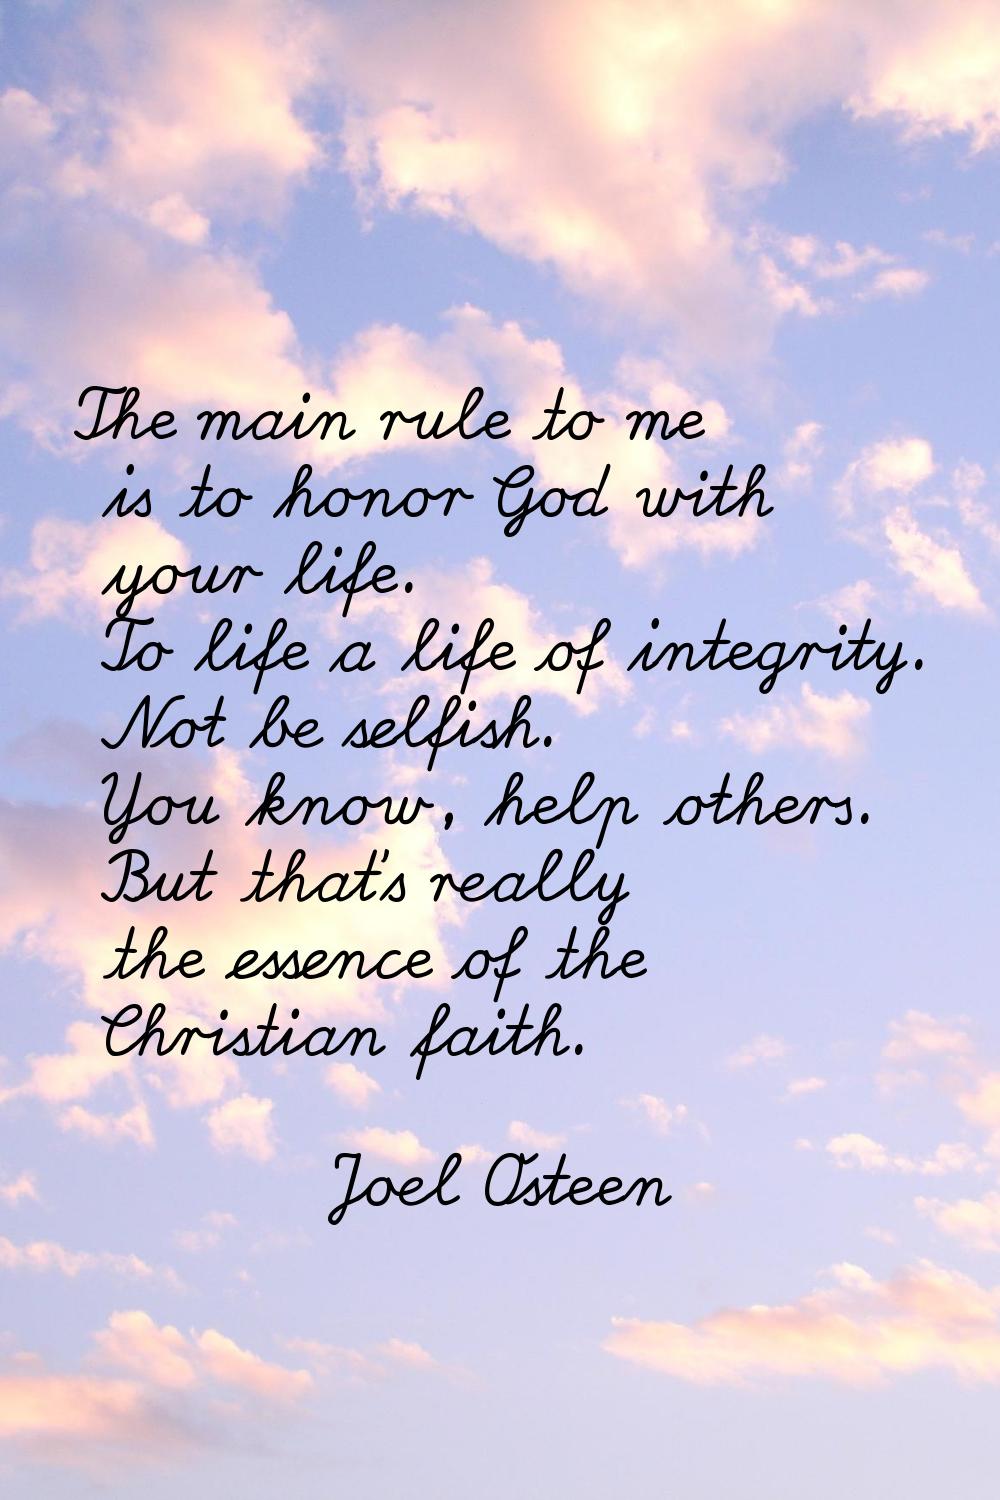 The main rule to me is to honor God with your life. To life a life of integrity. Not be selfish. Yo